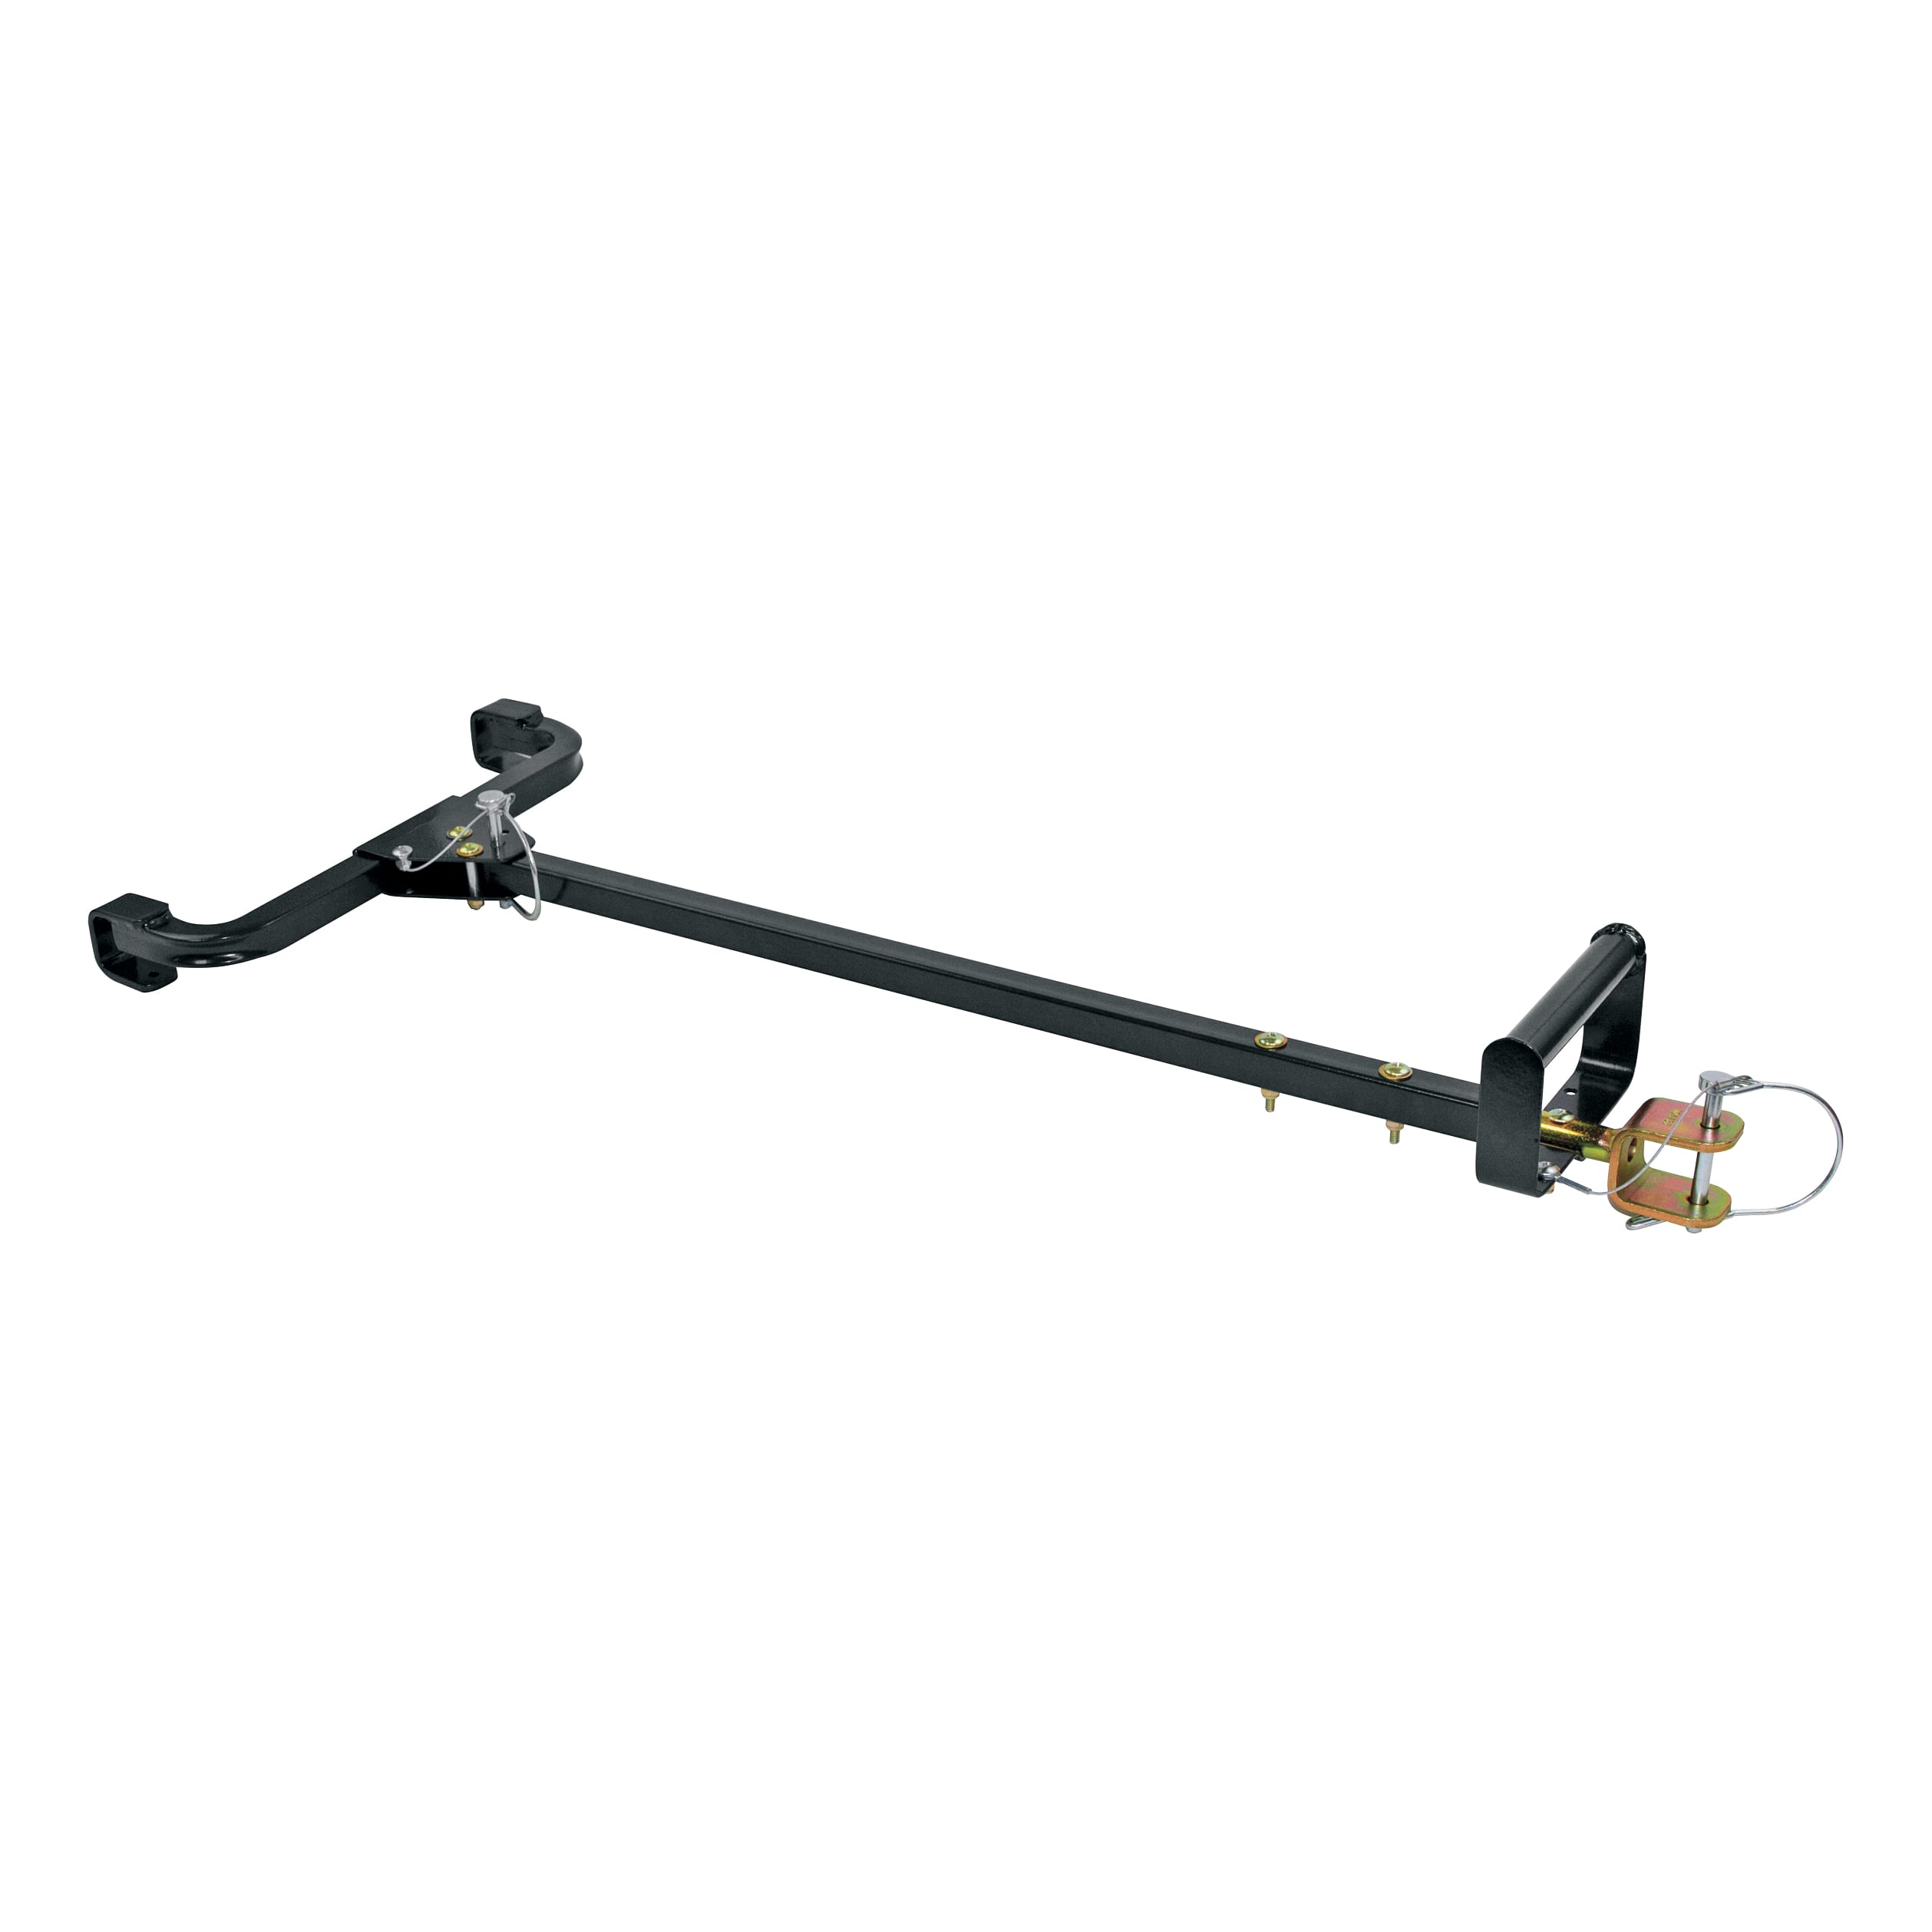 Clam 9877 Pro-Series Hitch